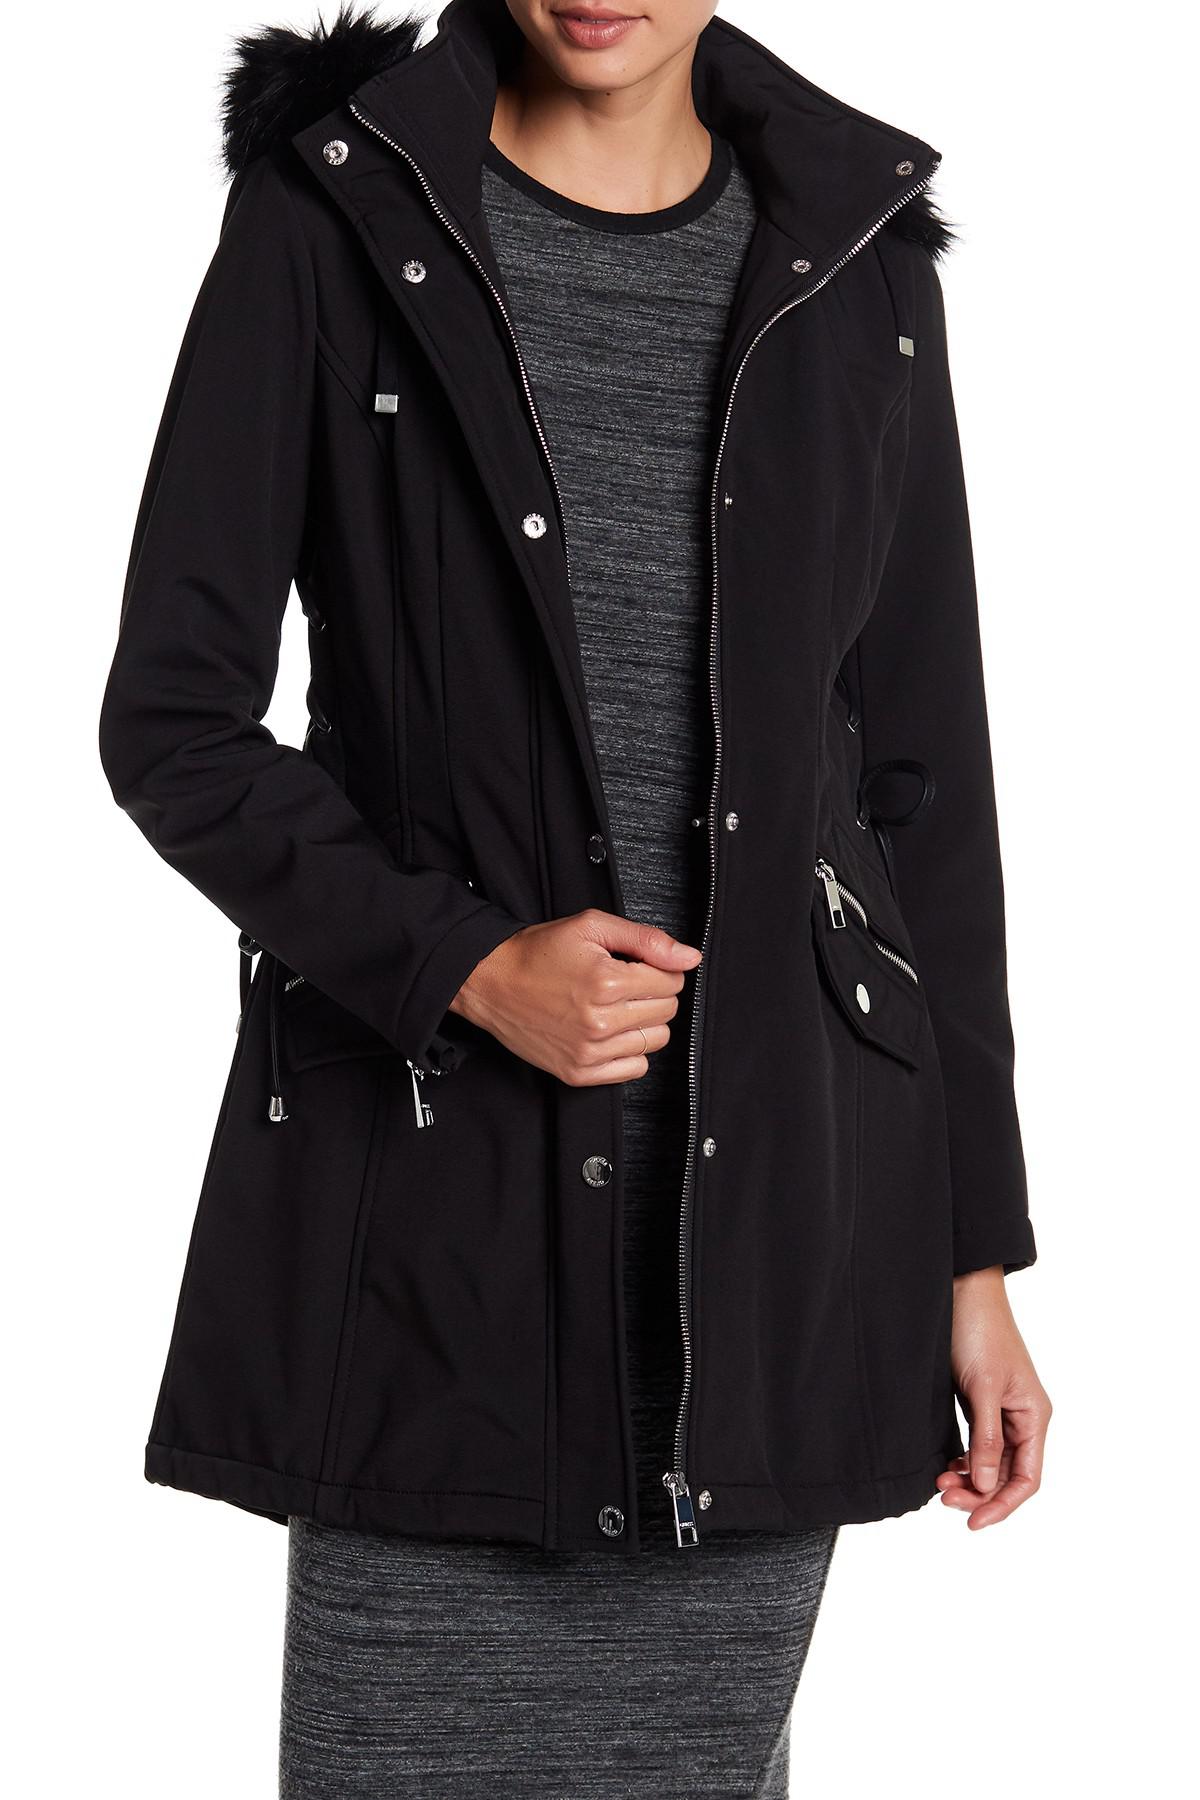 Guess Side Lace-up Faux Fur Trim Hooded Jacket in Black | Lyst